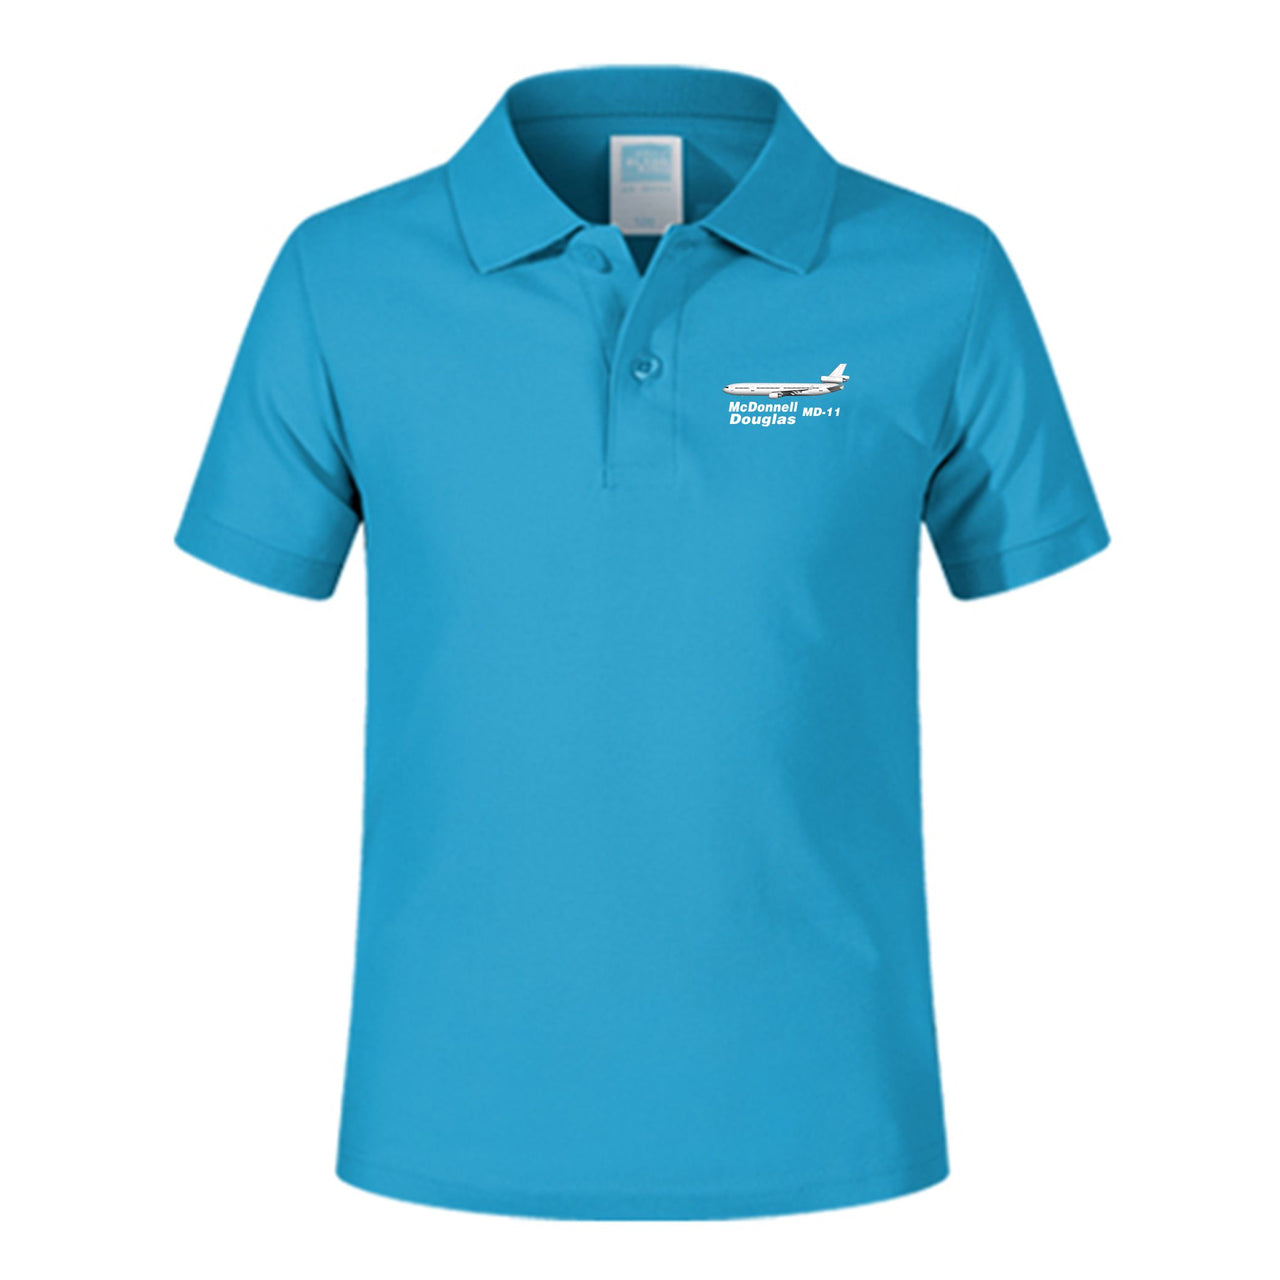 The McDonnell Douglas MD-11 Designed Children Polo T-Shirts